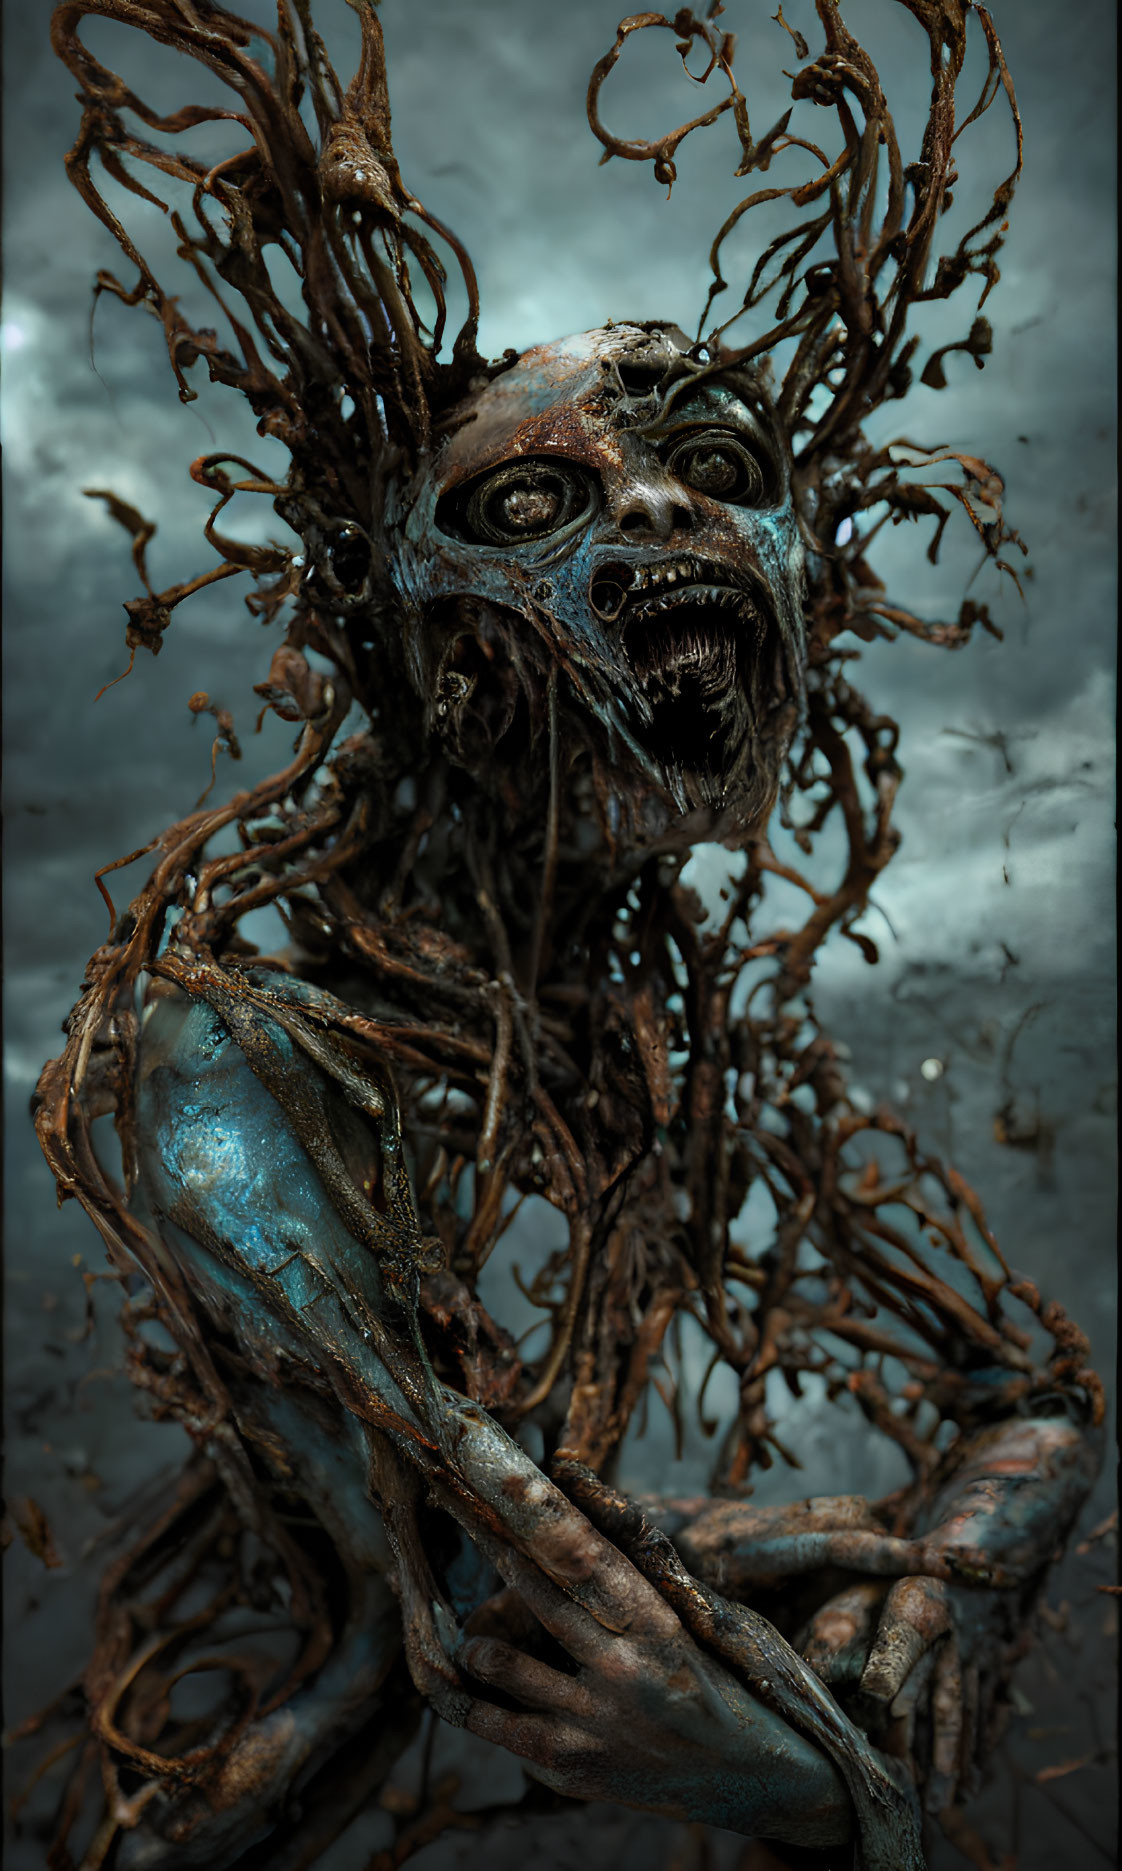 Elongated humanoid figure intertwined with branches on dark background